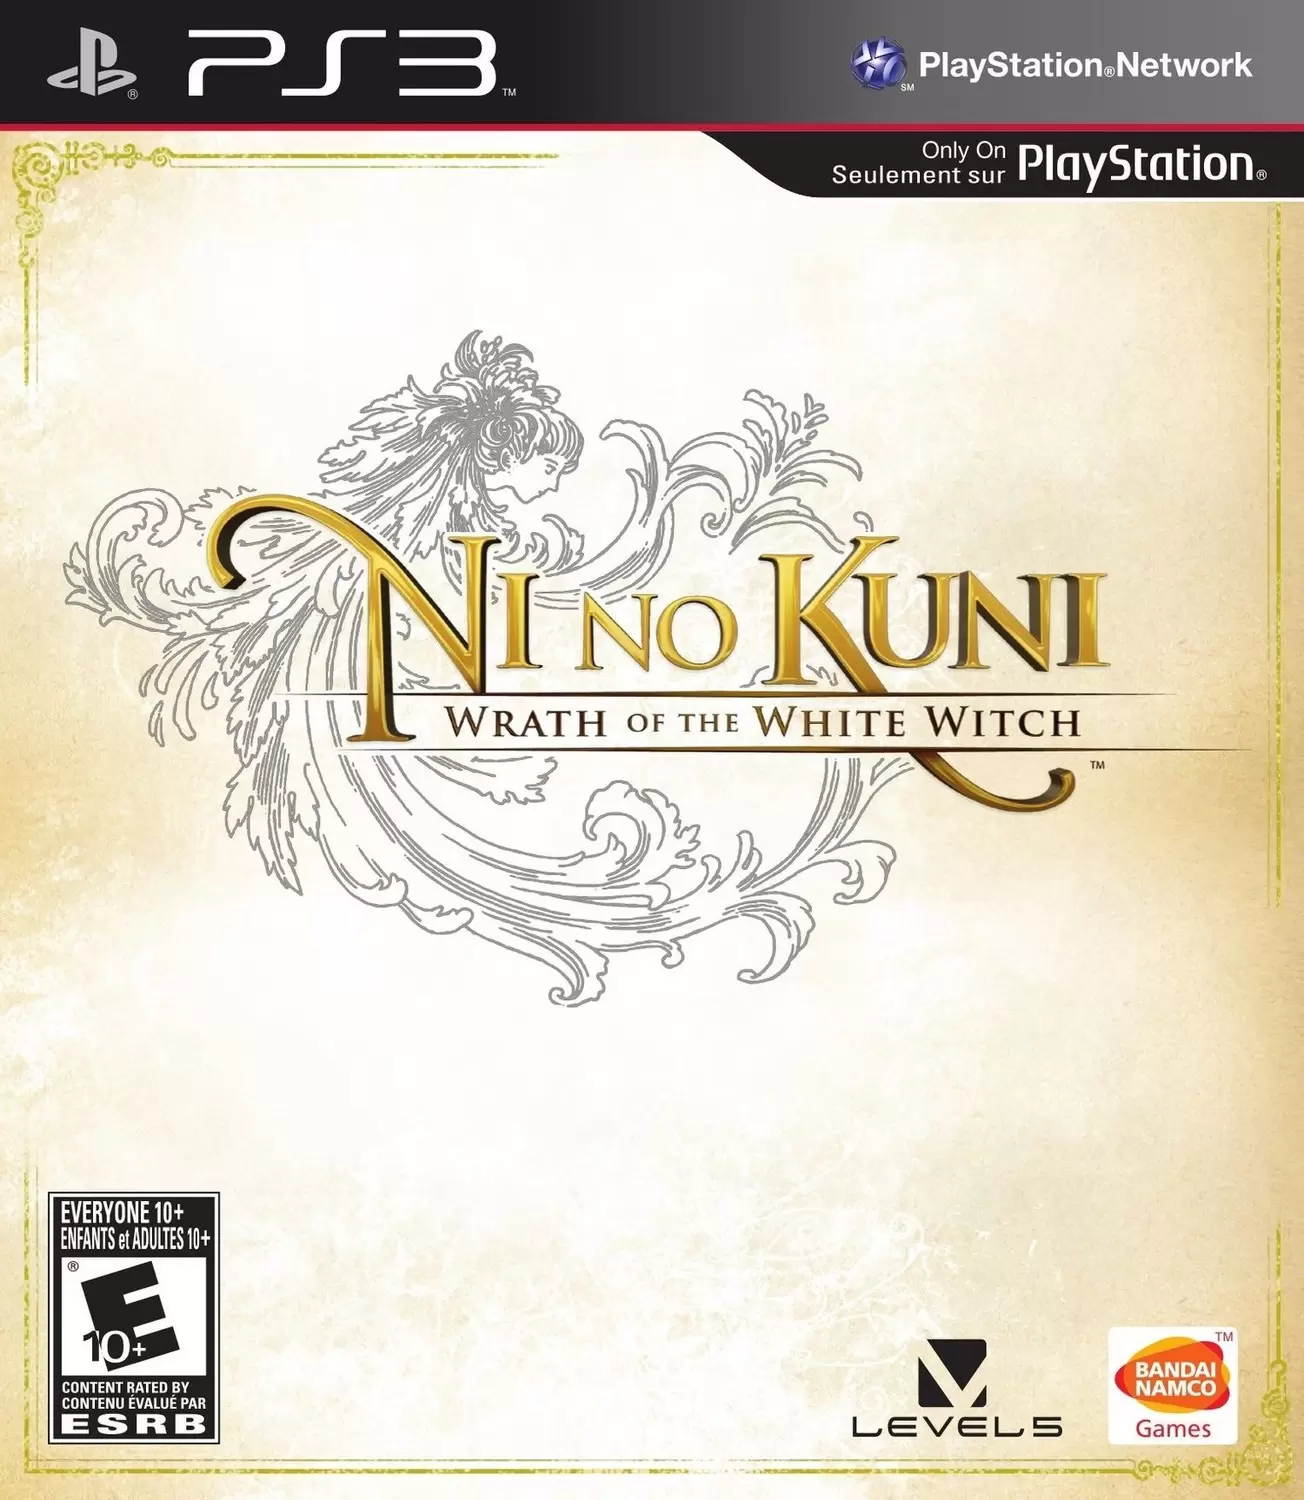 PS3 Games - Ni no Kuni: Wrath of the White Witch